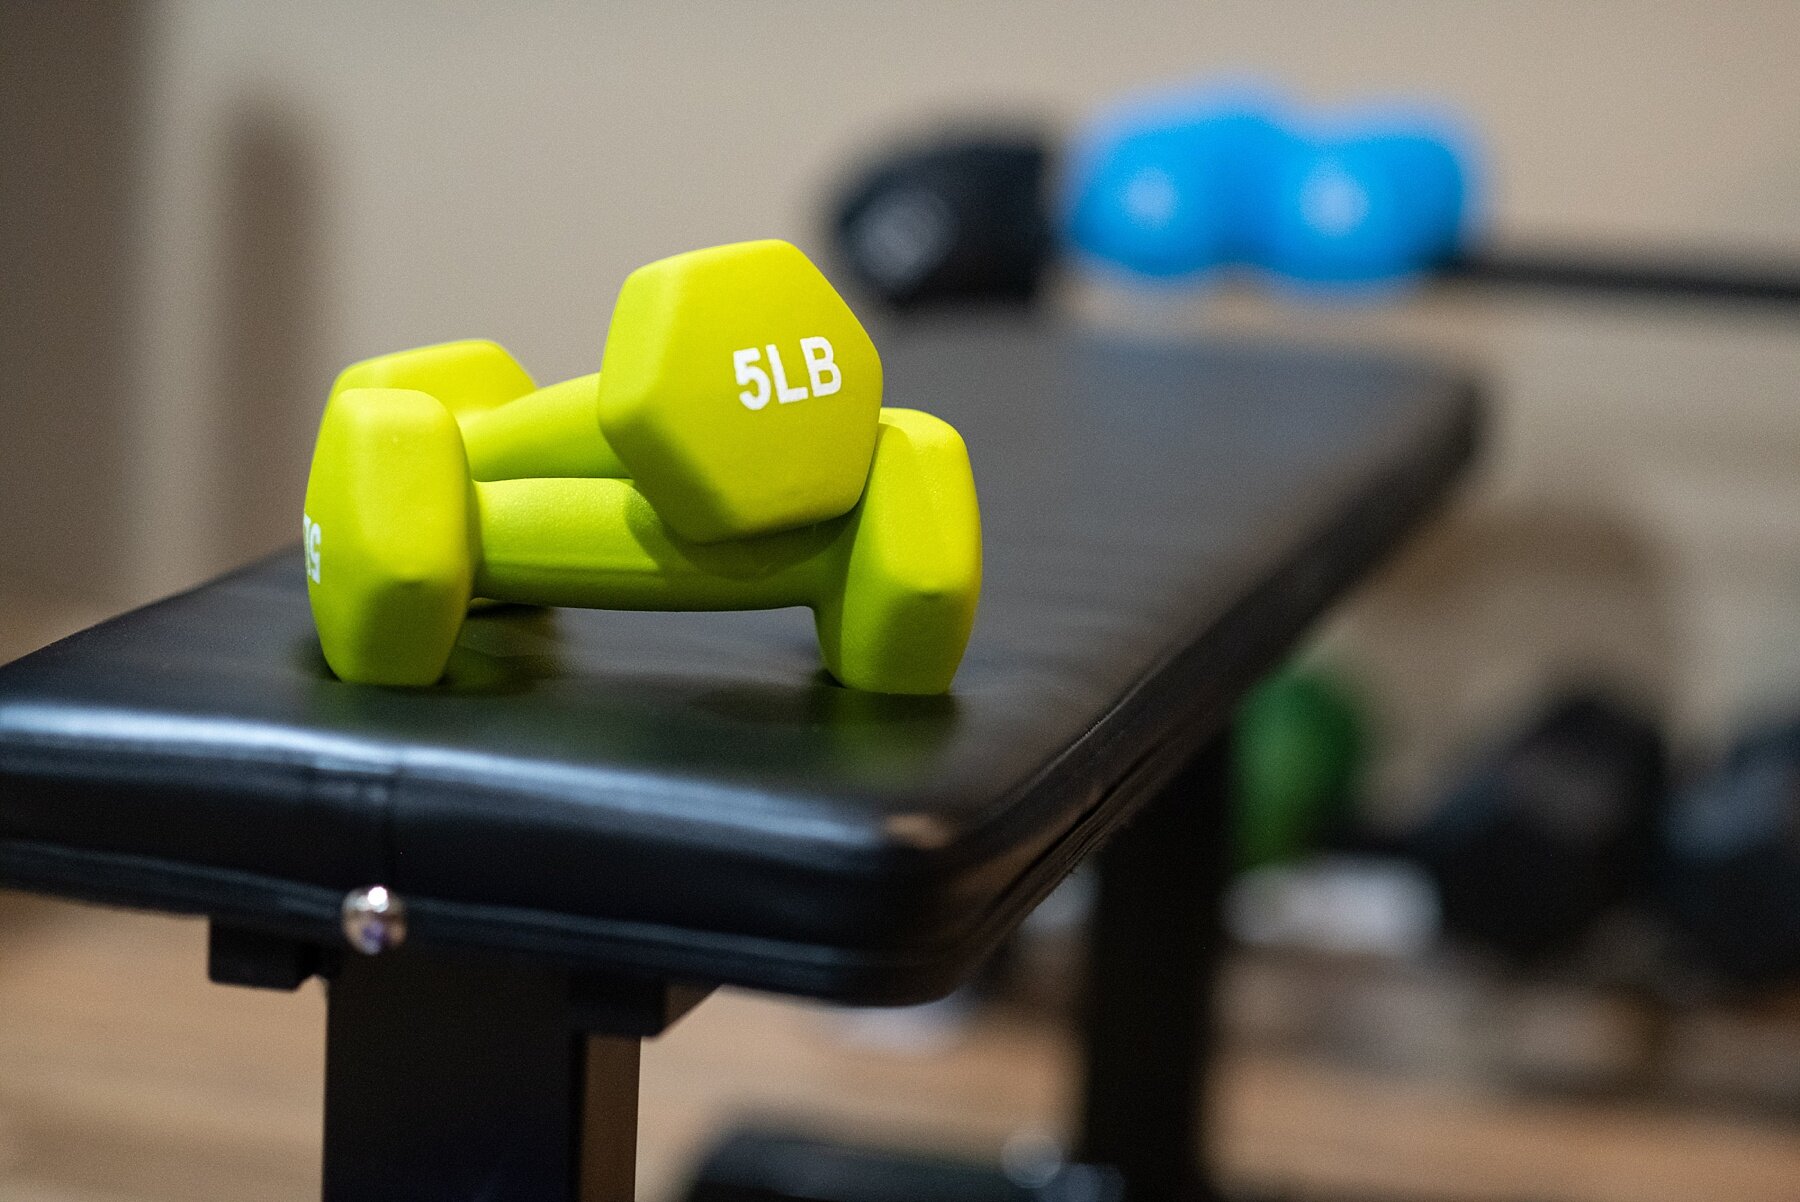 Wendy Zook Photography | Fitness journey, home gym, workout at home, basement gym, workout gear, workout clothes, inspiration for working out at home, dumb bells, colorful dumbbells